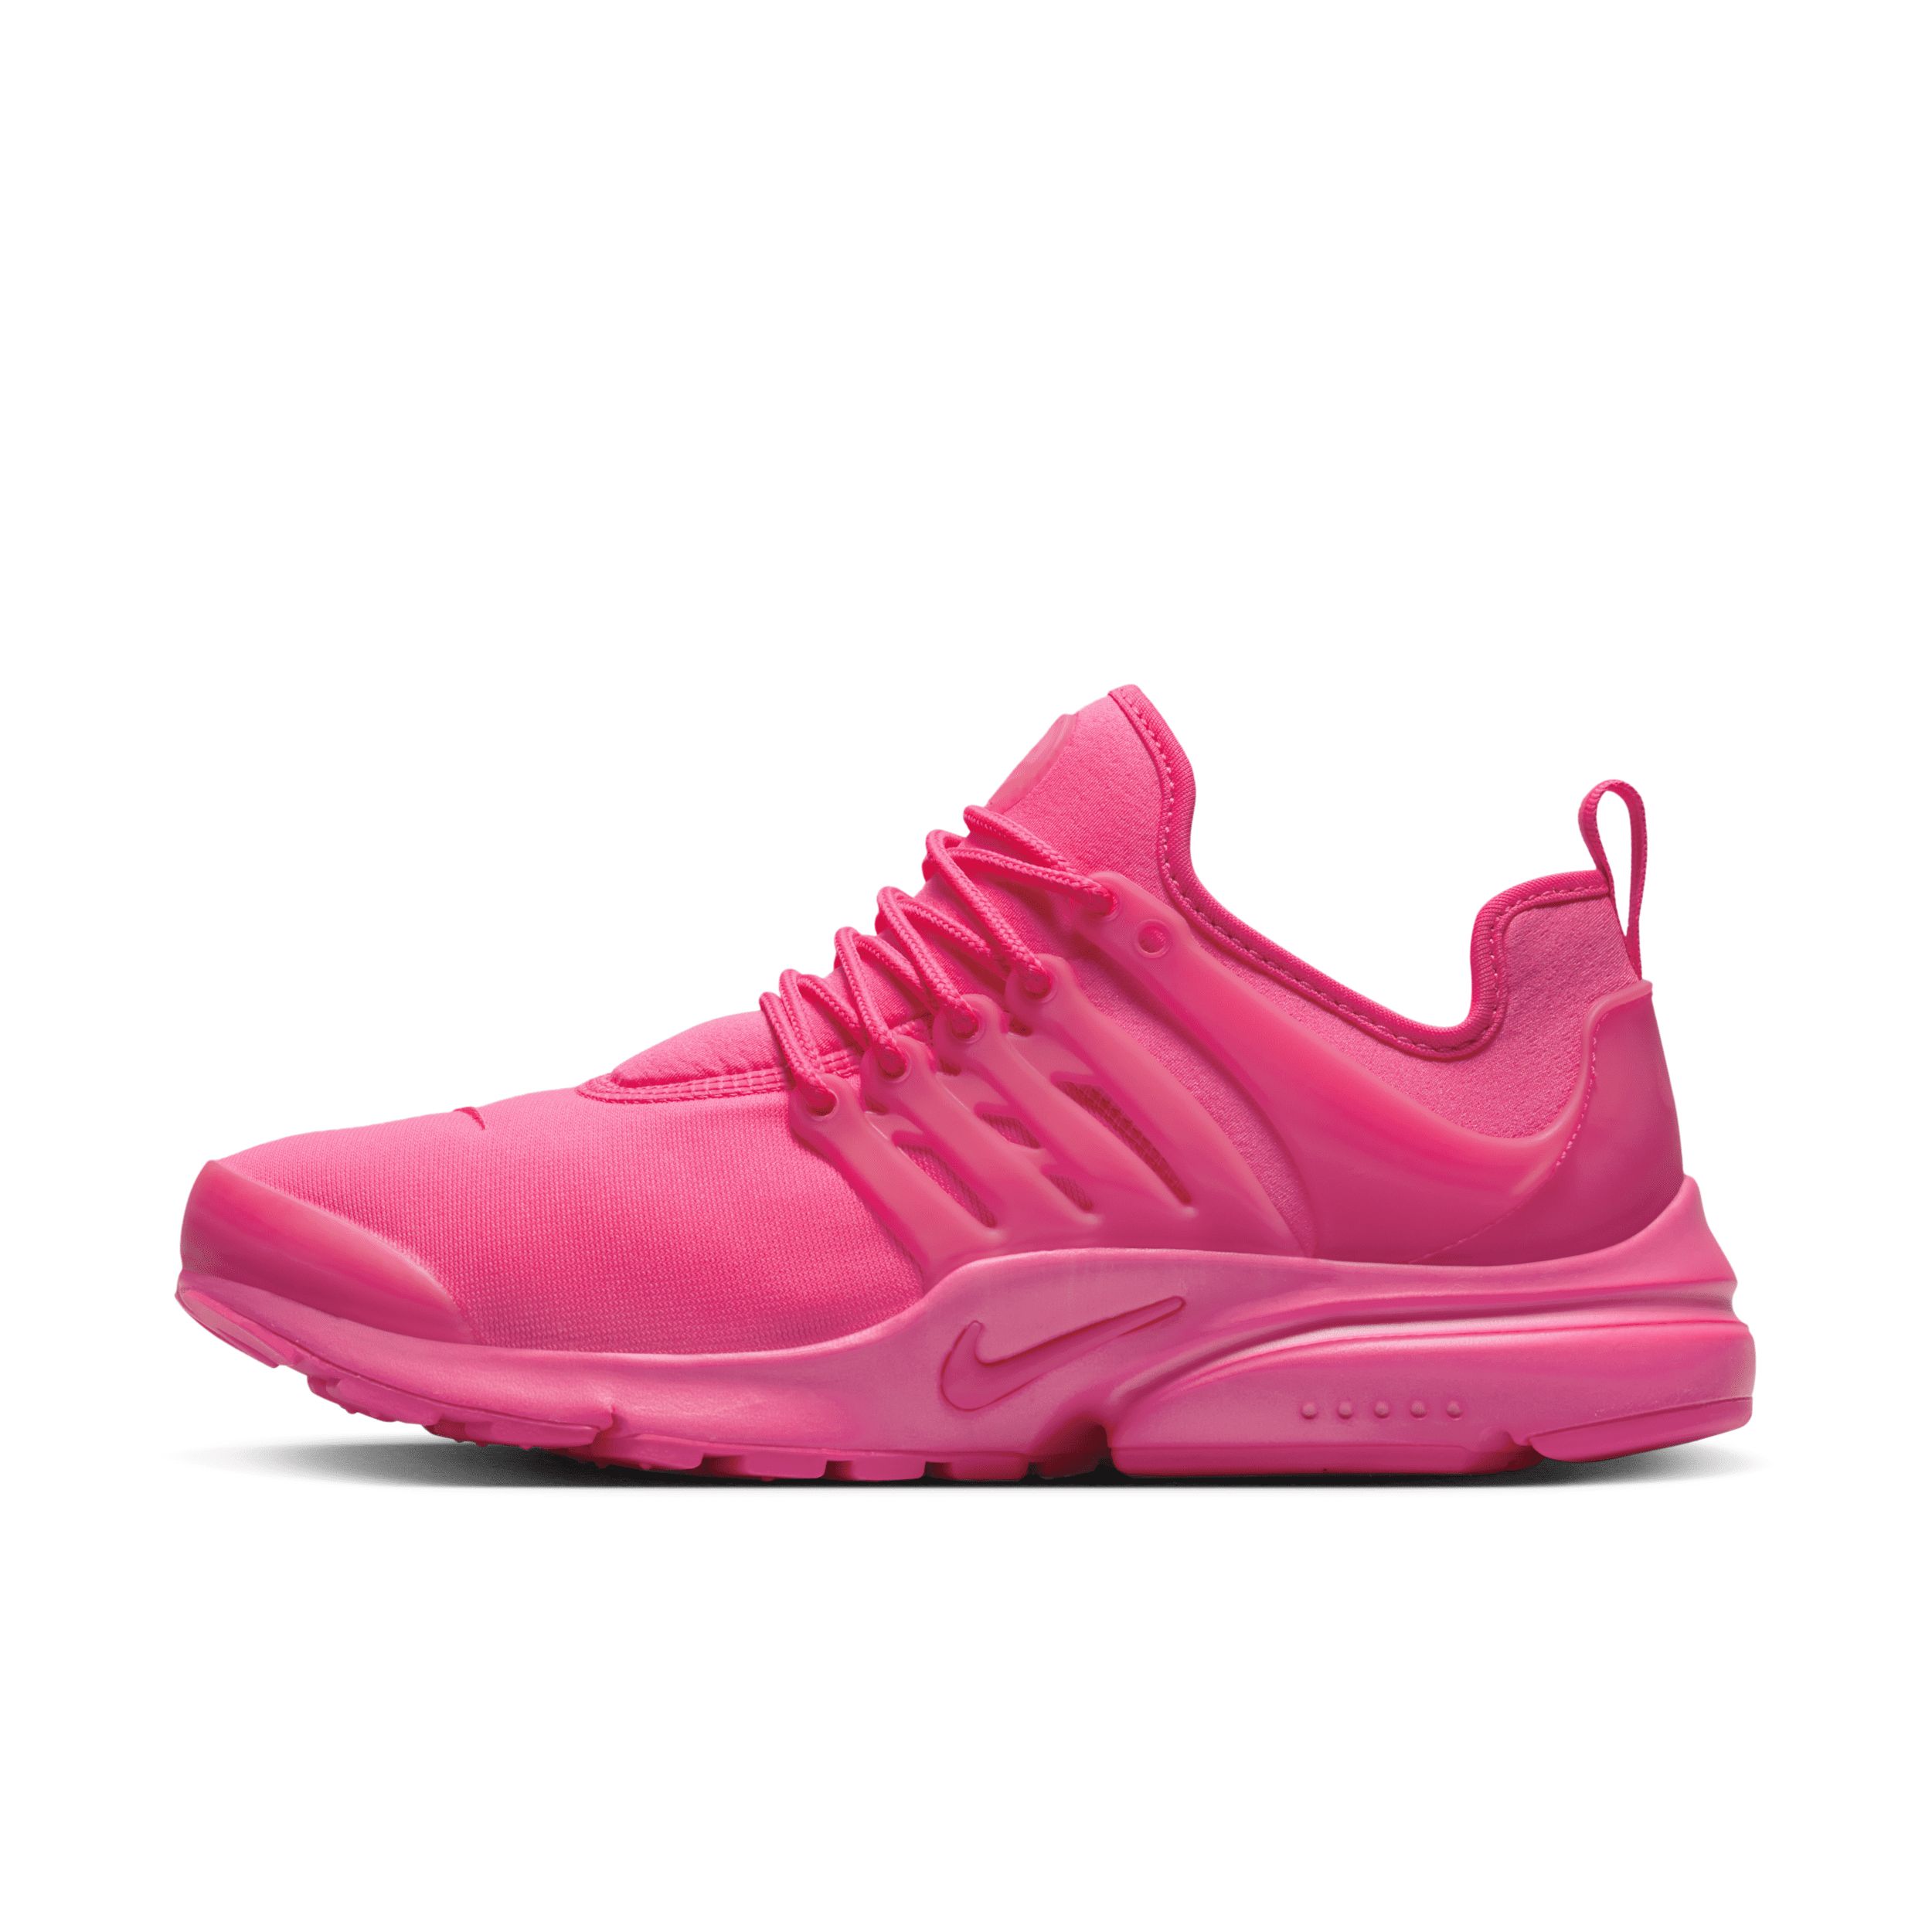 Nike Women's Air Presto Shoes in Pink, Size: 8 | FD0290-600 | Nike (US)